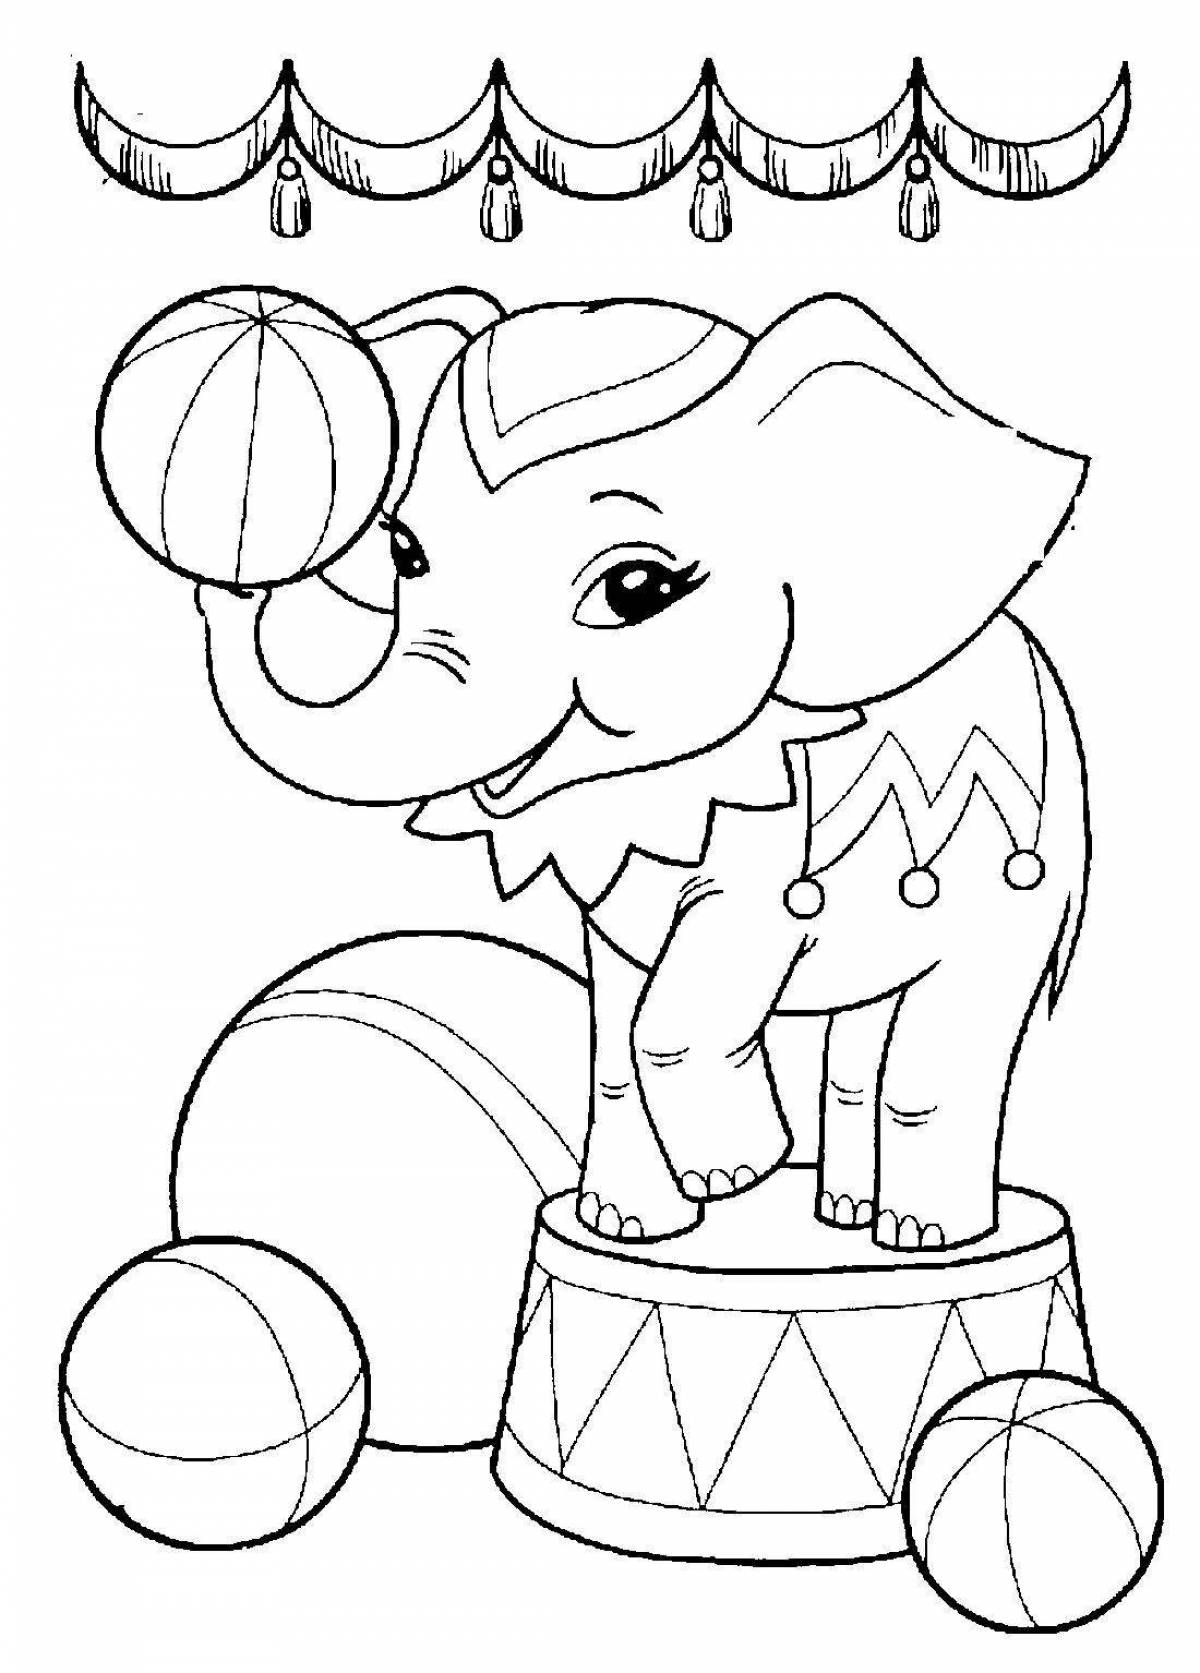 Coloring book bright circus elephant